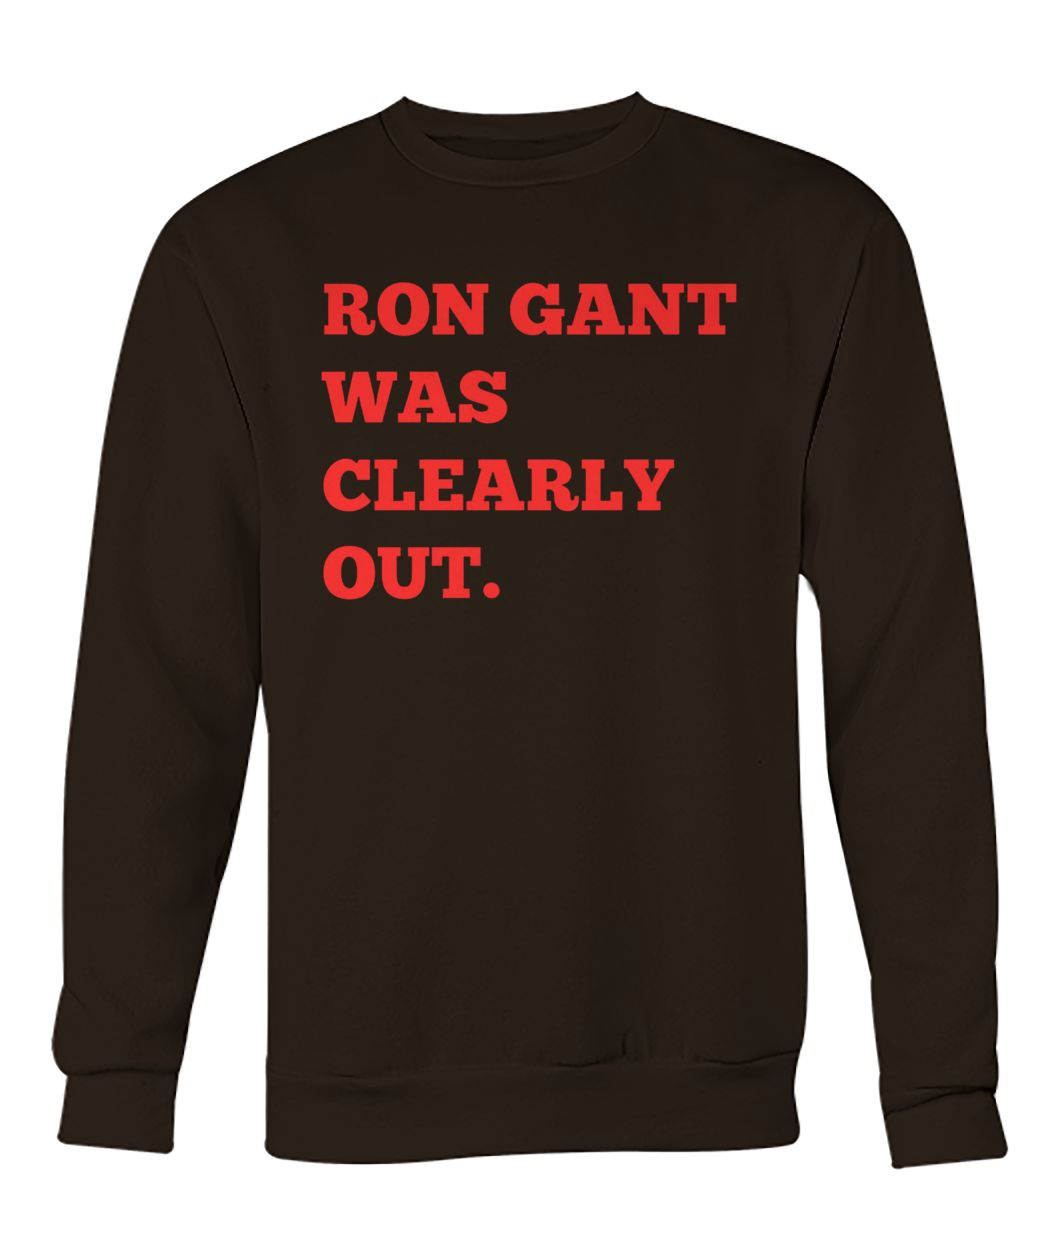 Ron gant was clearly out shirt and crew neck sweatshirt